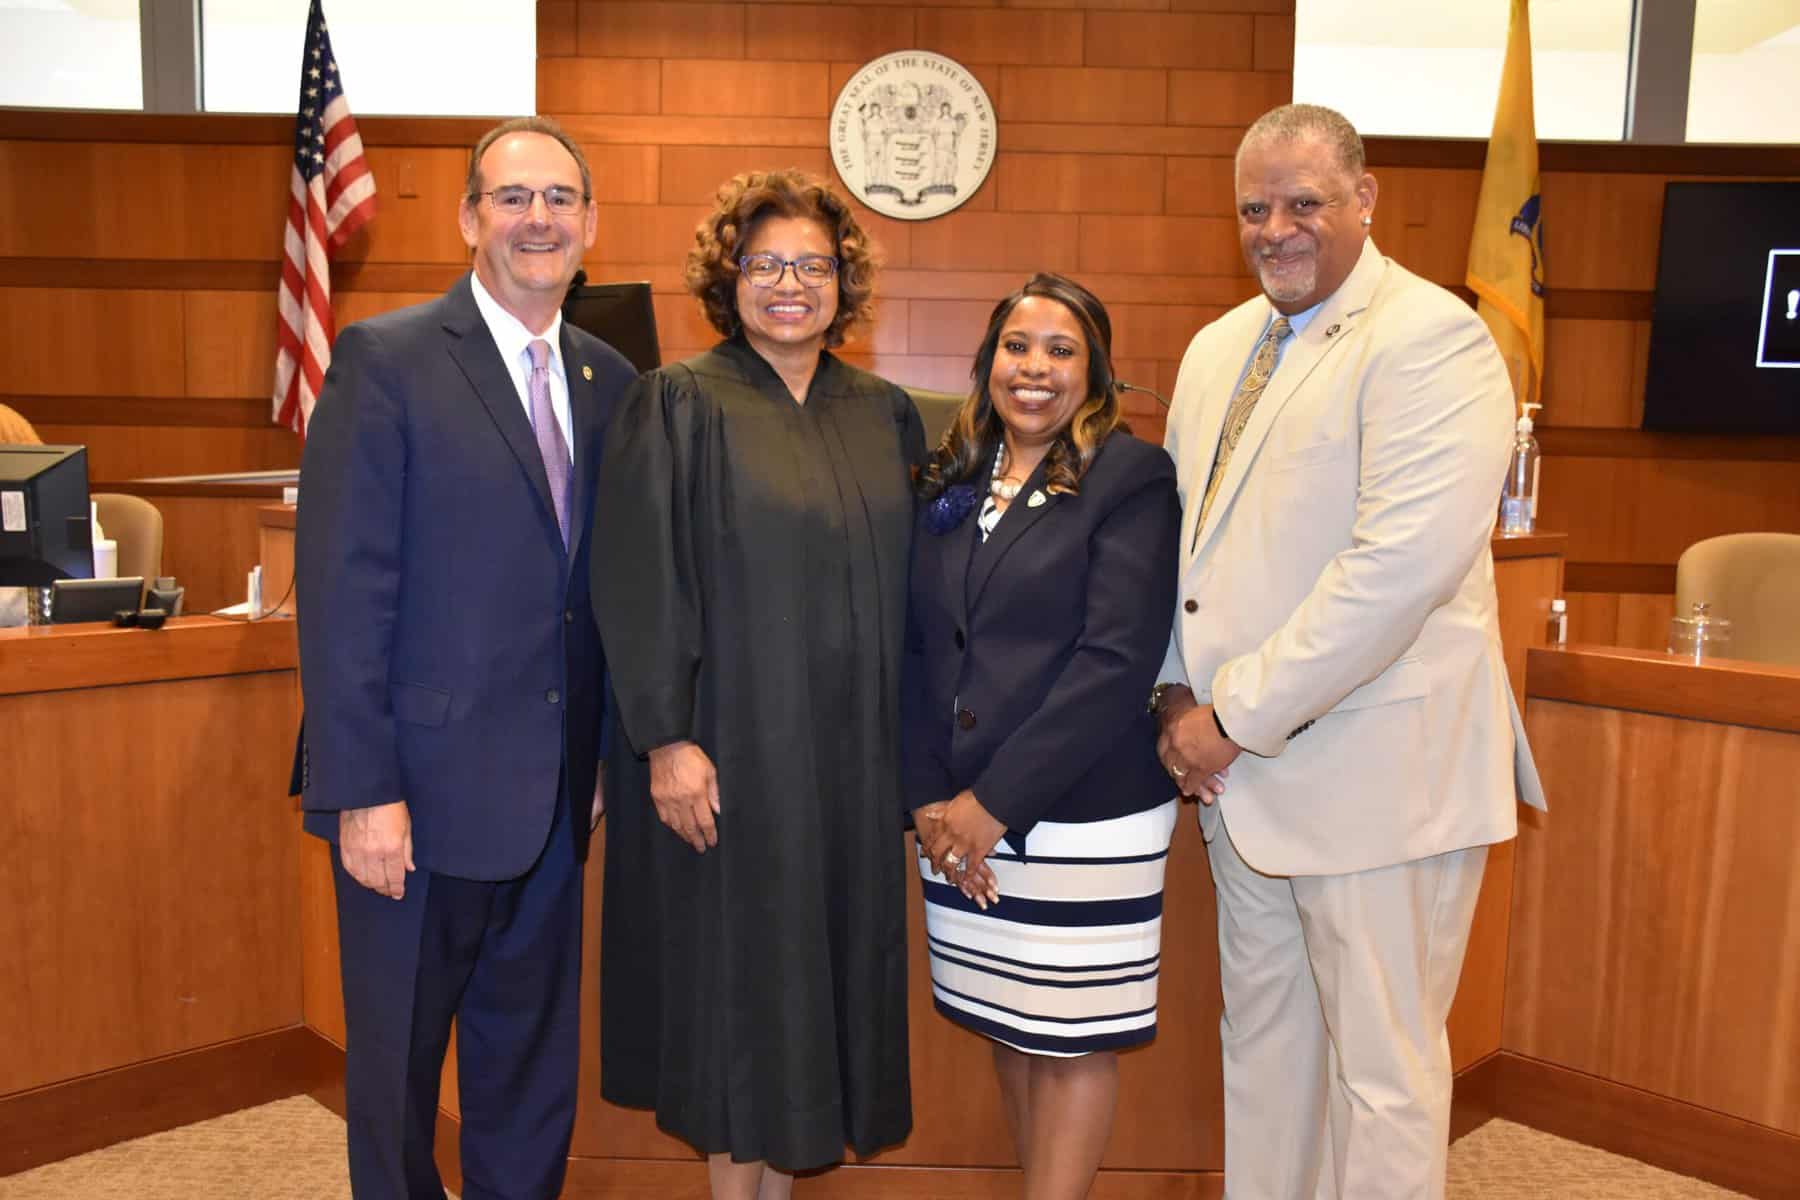 Lawrence High alumna Jennifer Downing-Mathis promoted to first assistant prosecutor for Mercer County